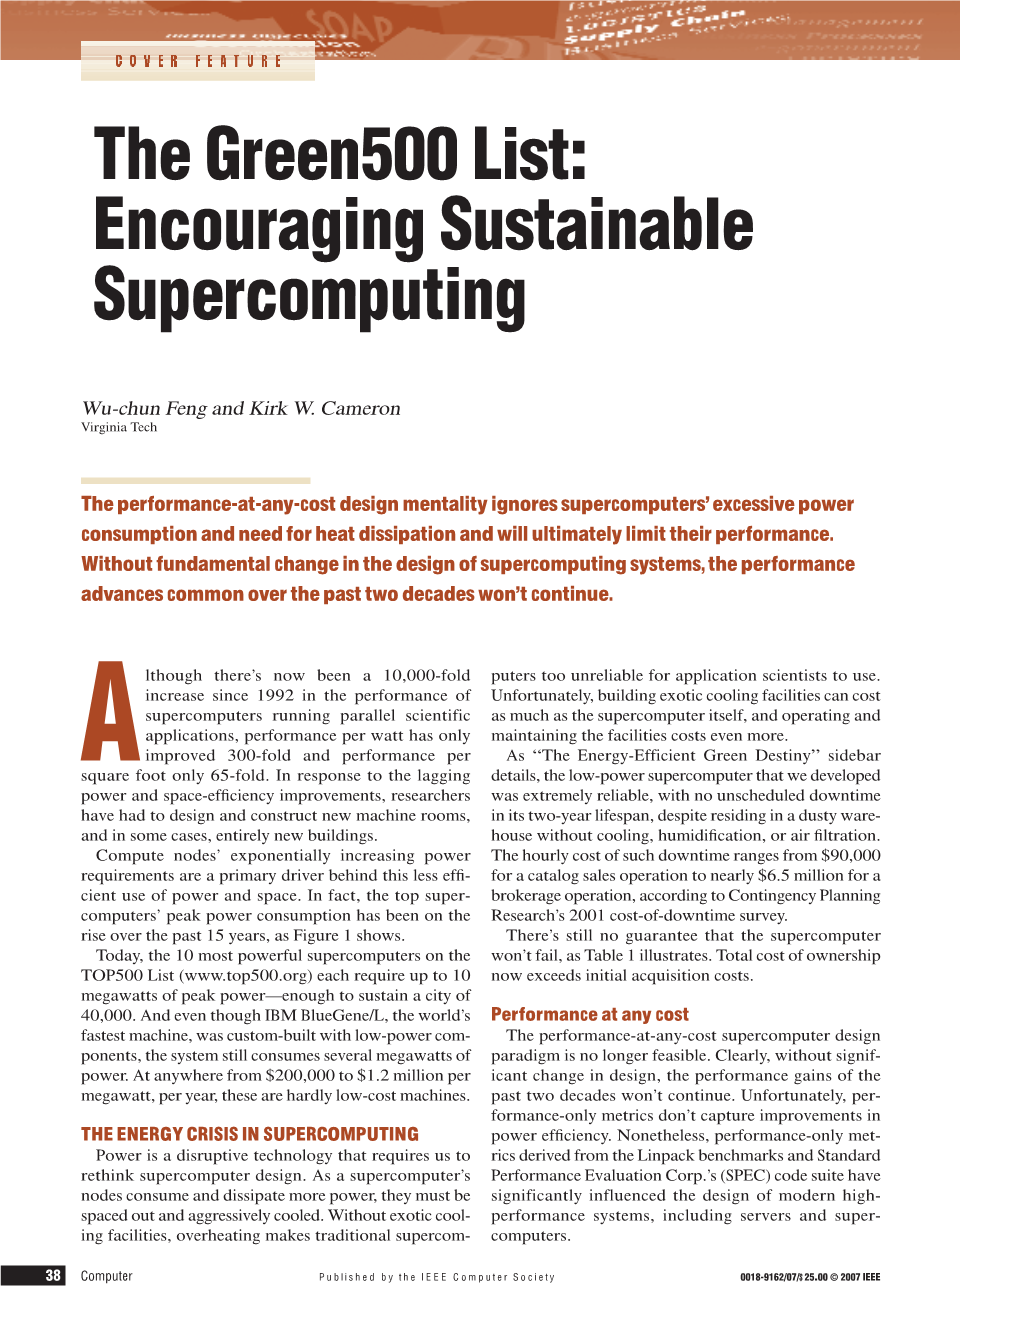 The Green500 List: Encouraging Sustainable Supercomputing